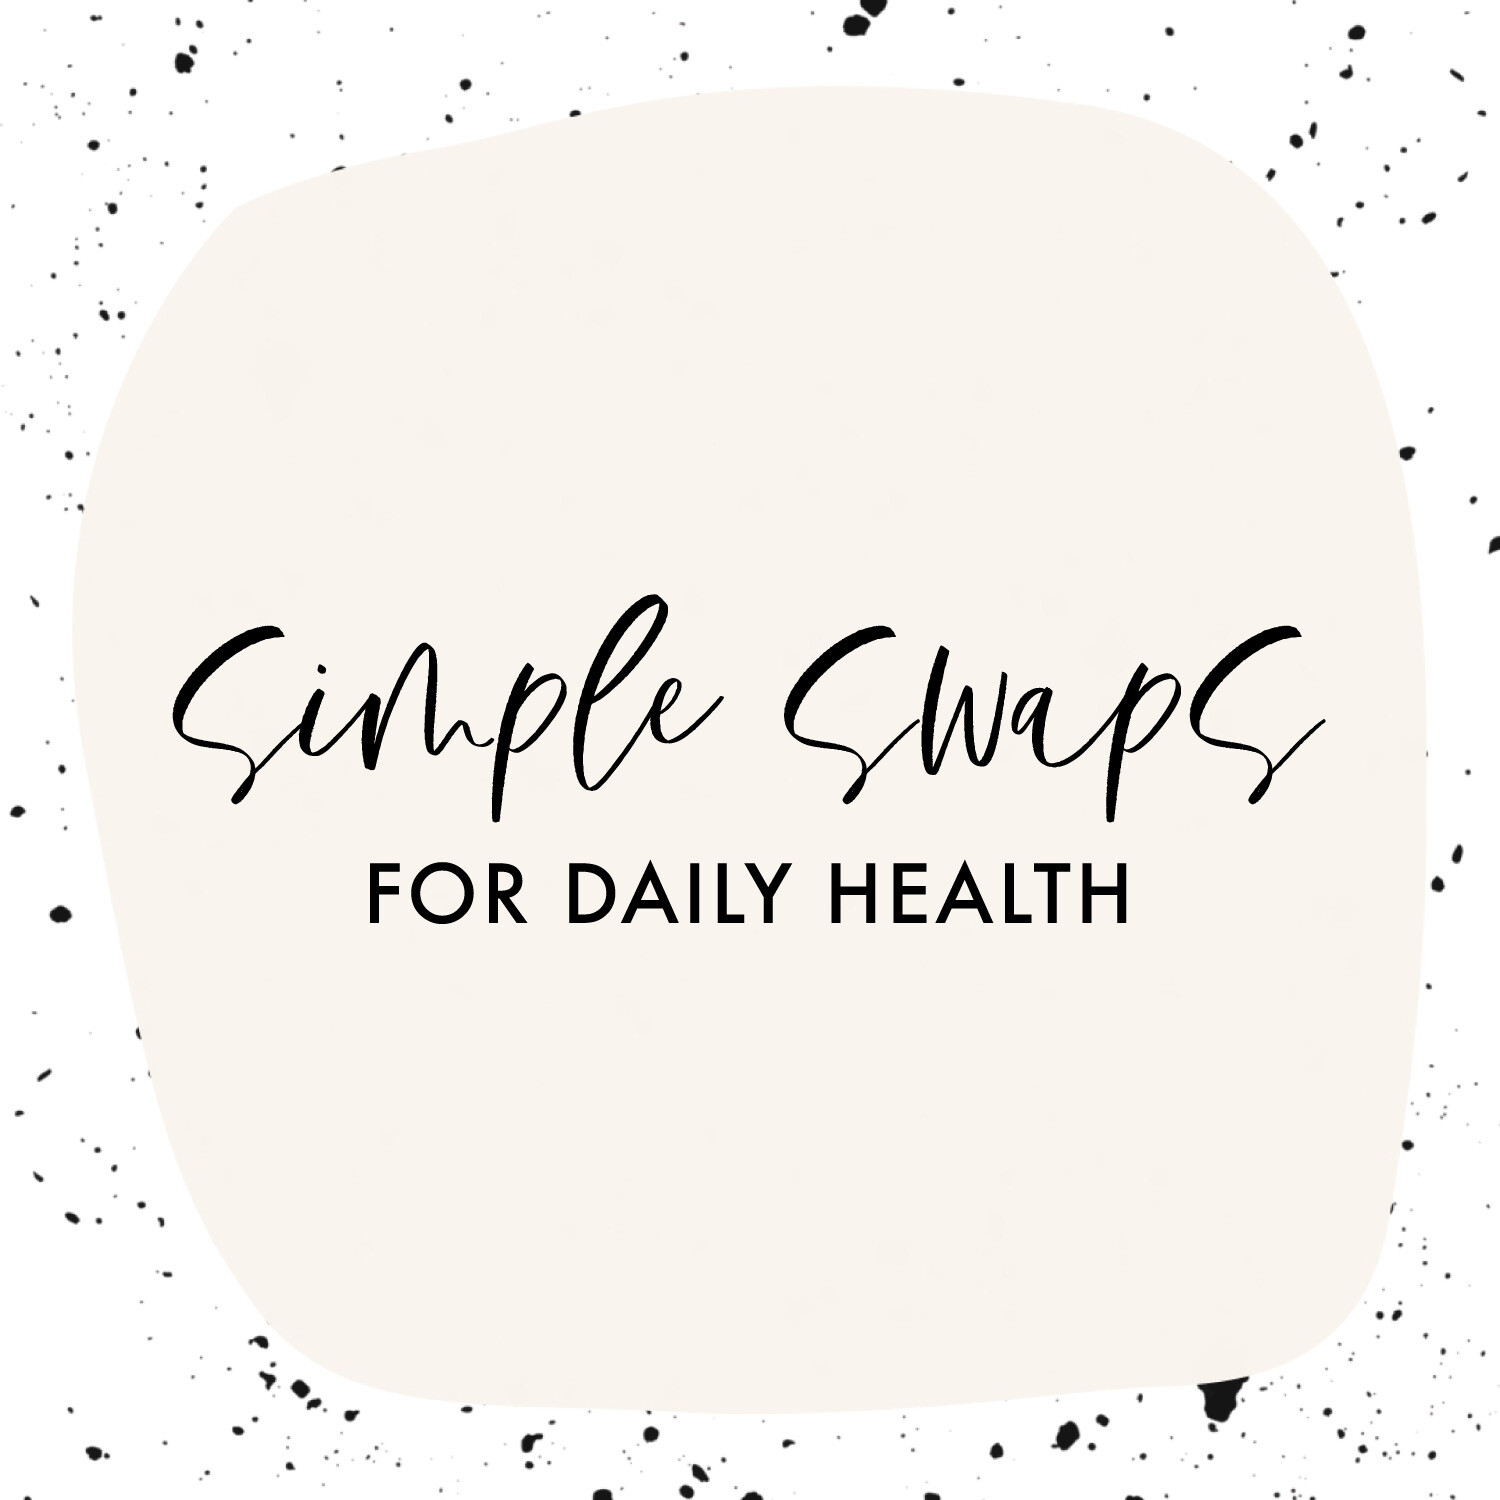 Simple Swaps for Daily Health